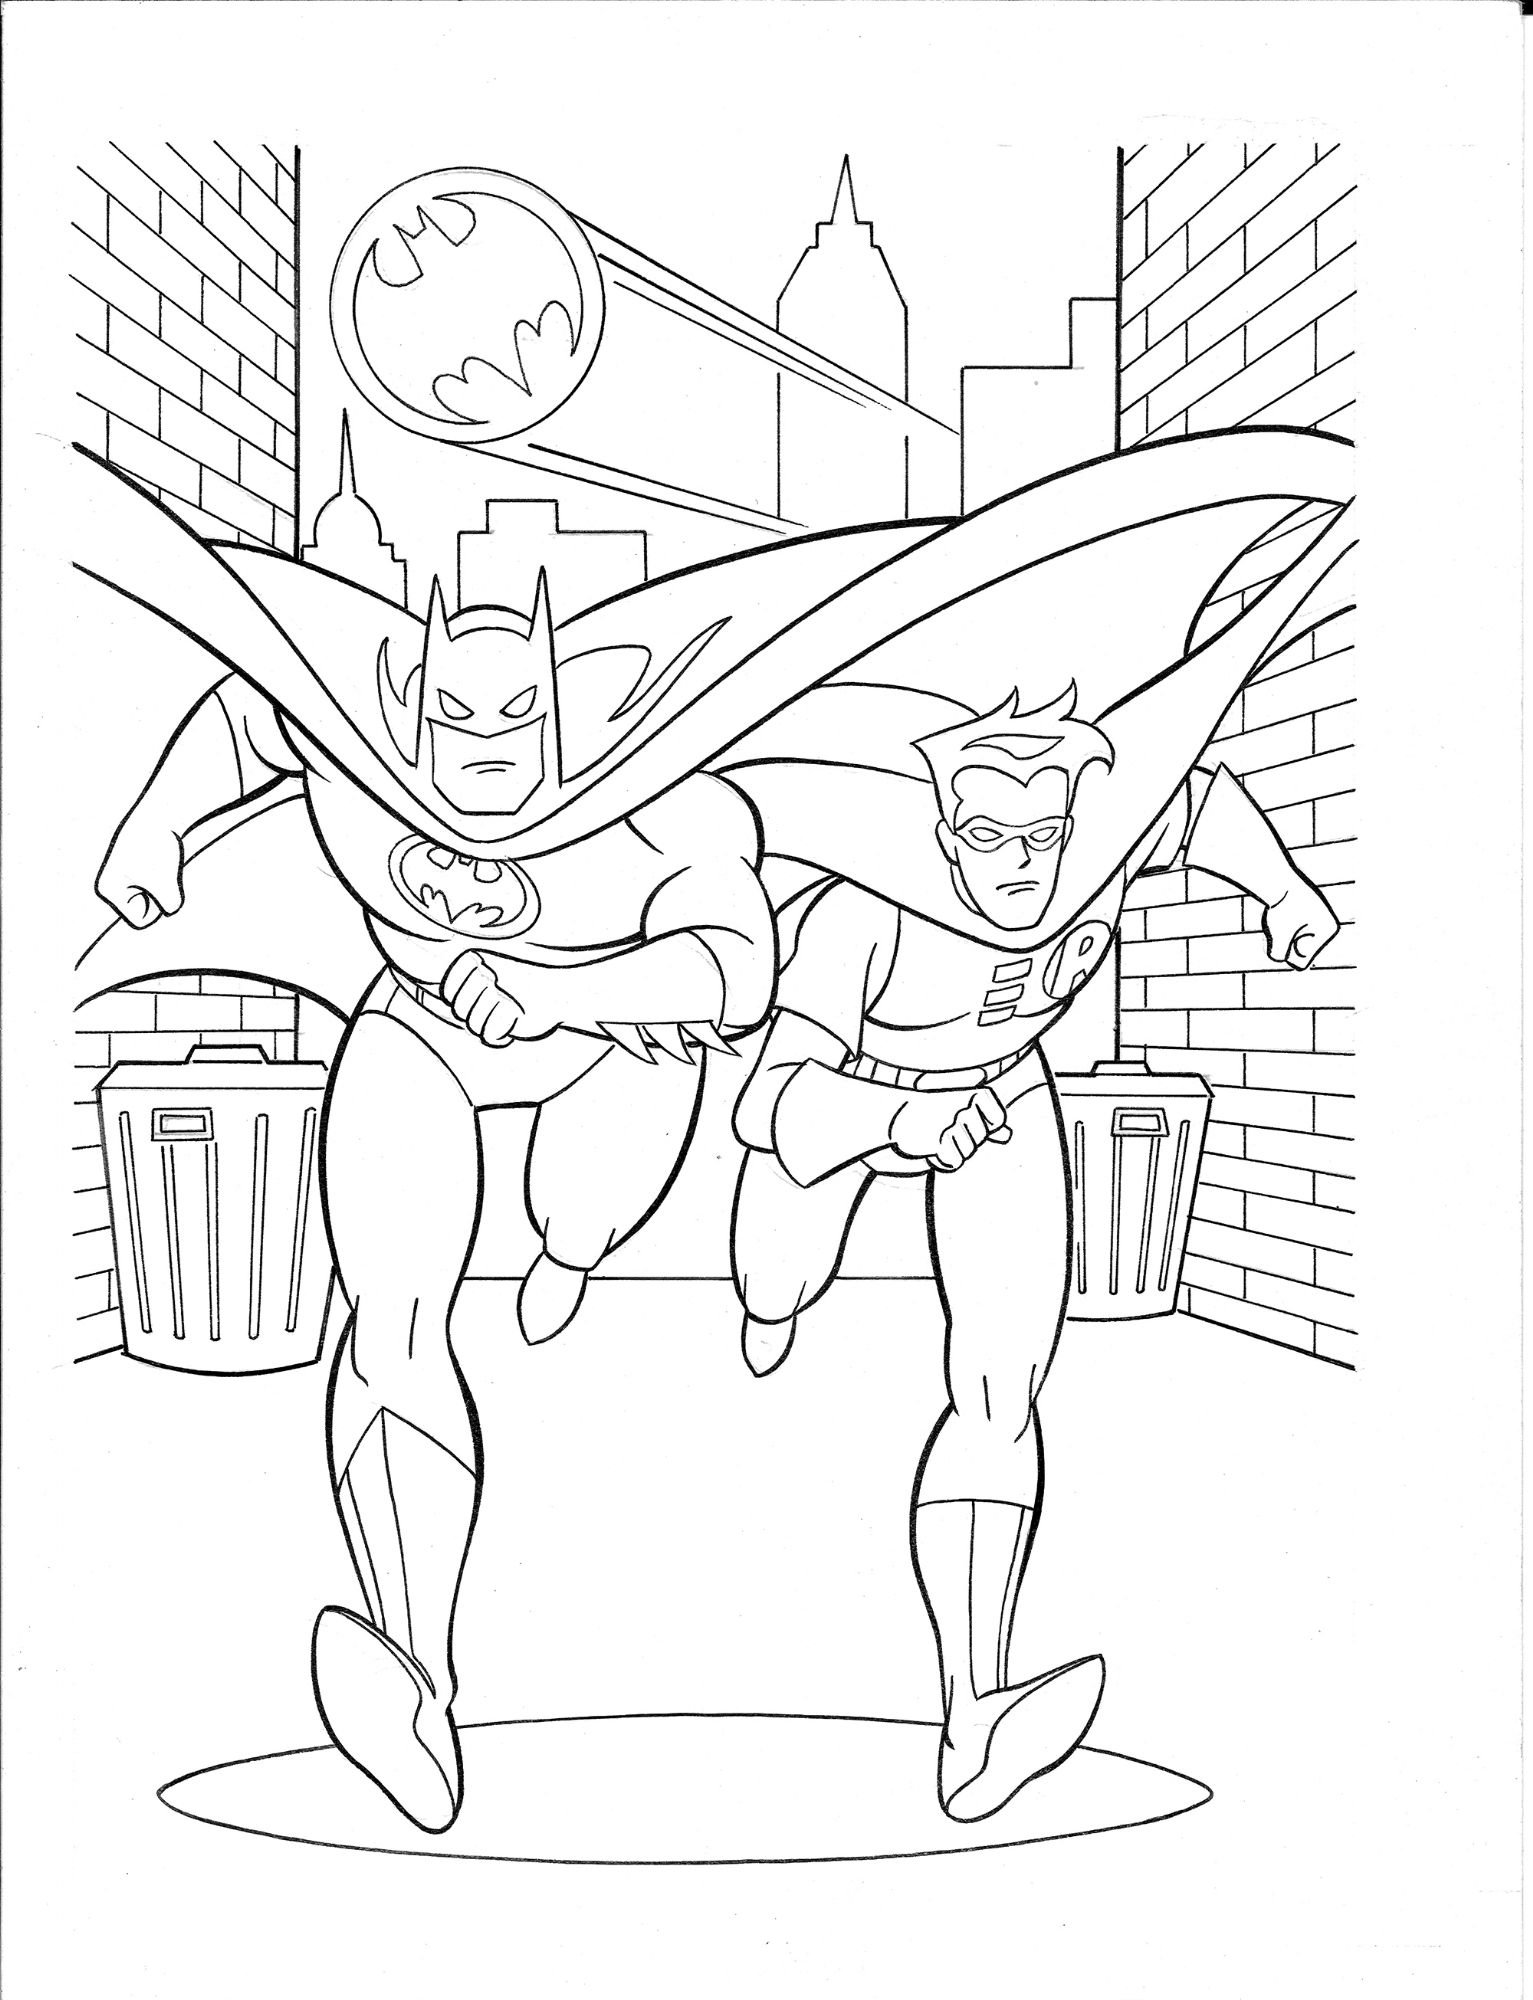 Batman Coloring Book: Great Coloring Book For Those Who Are